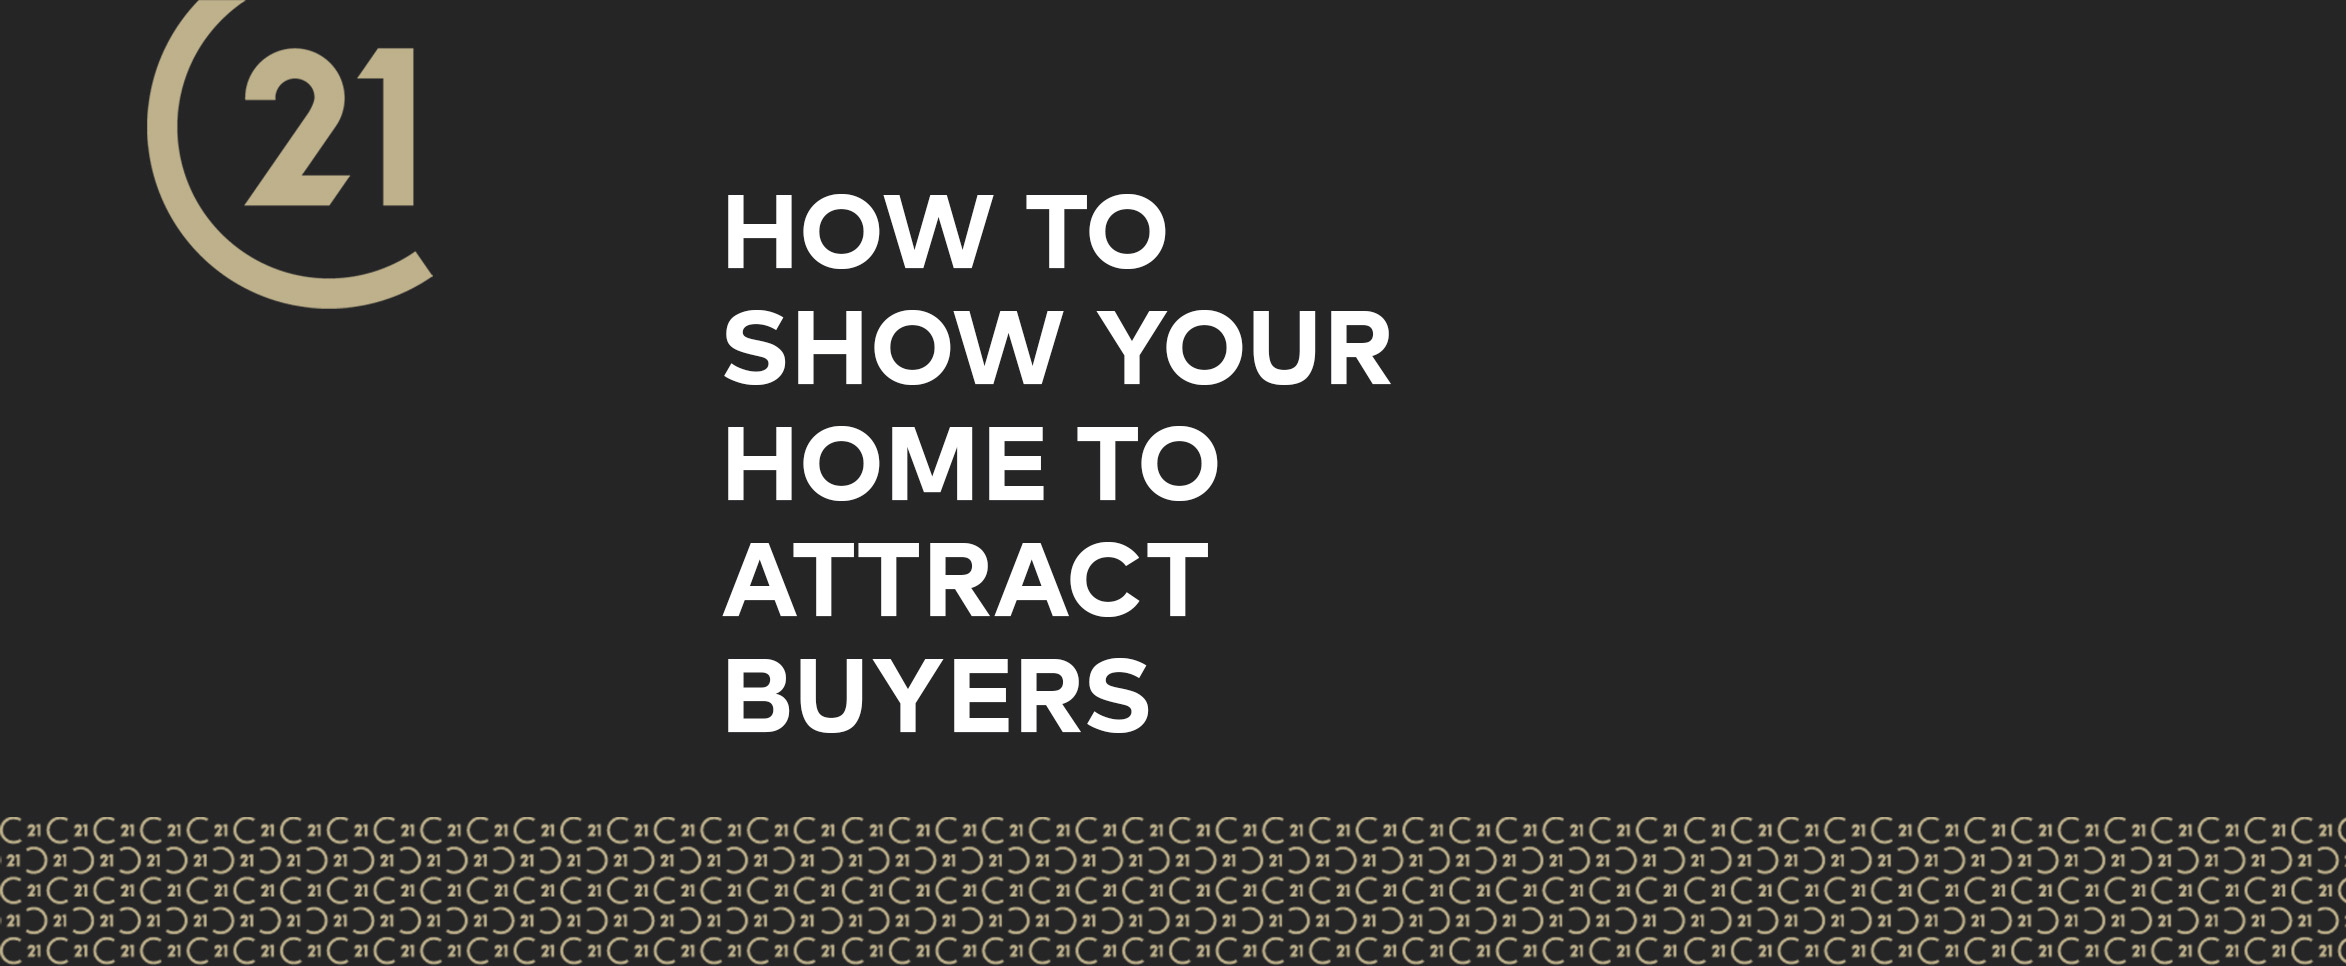 How to Show Your Home to Attract Buyers